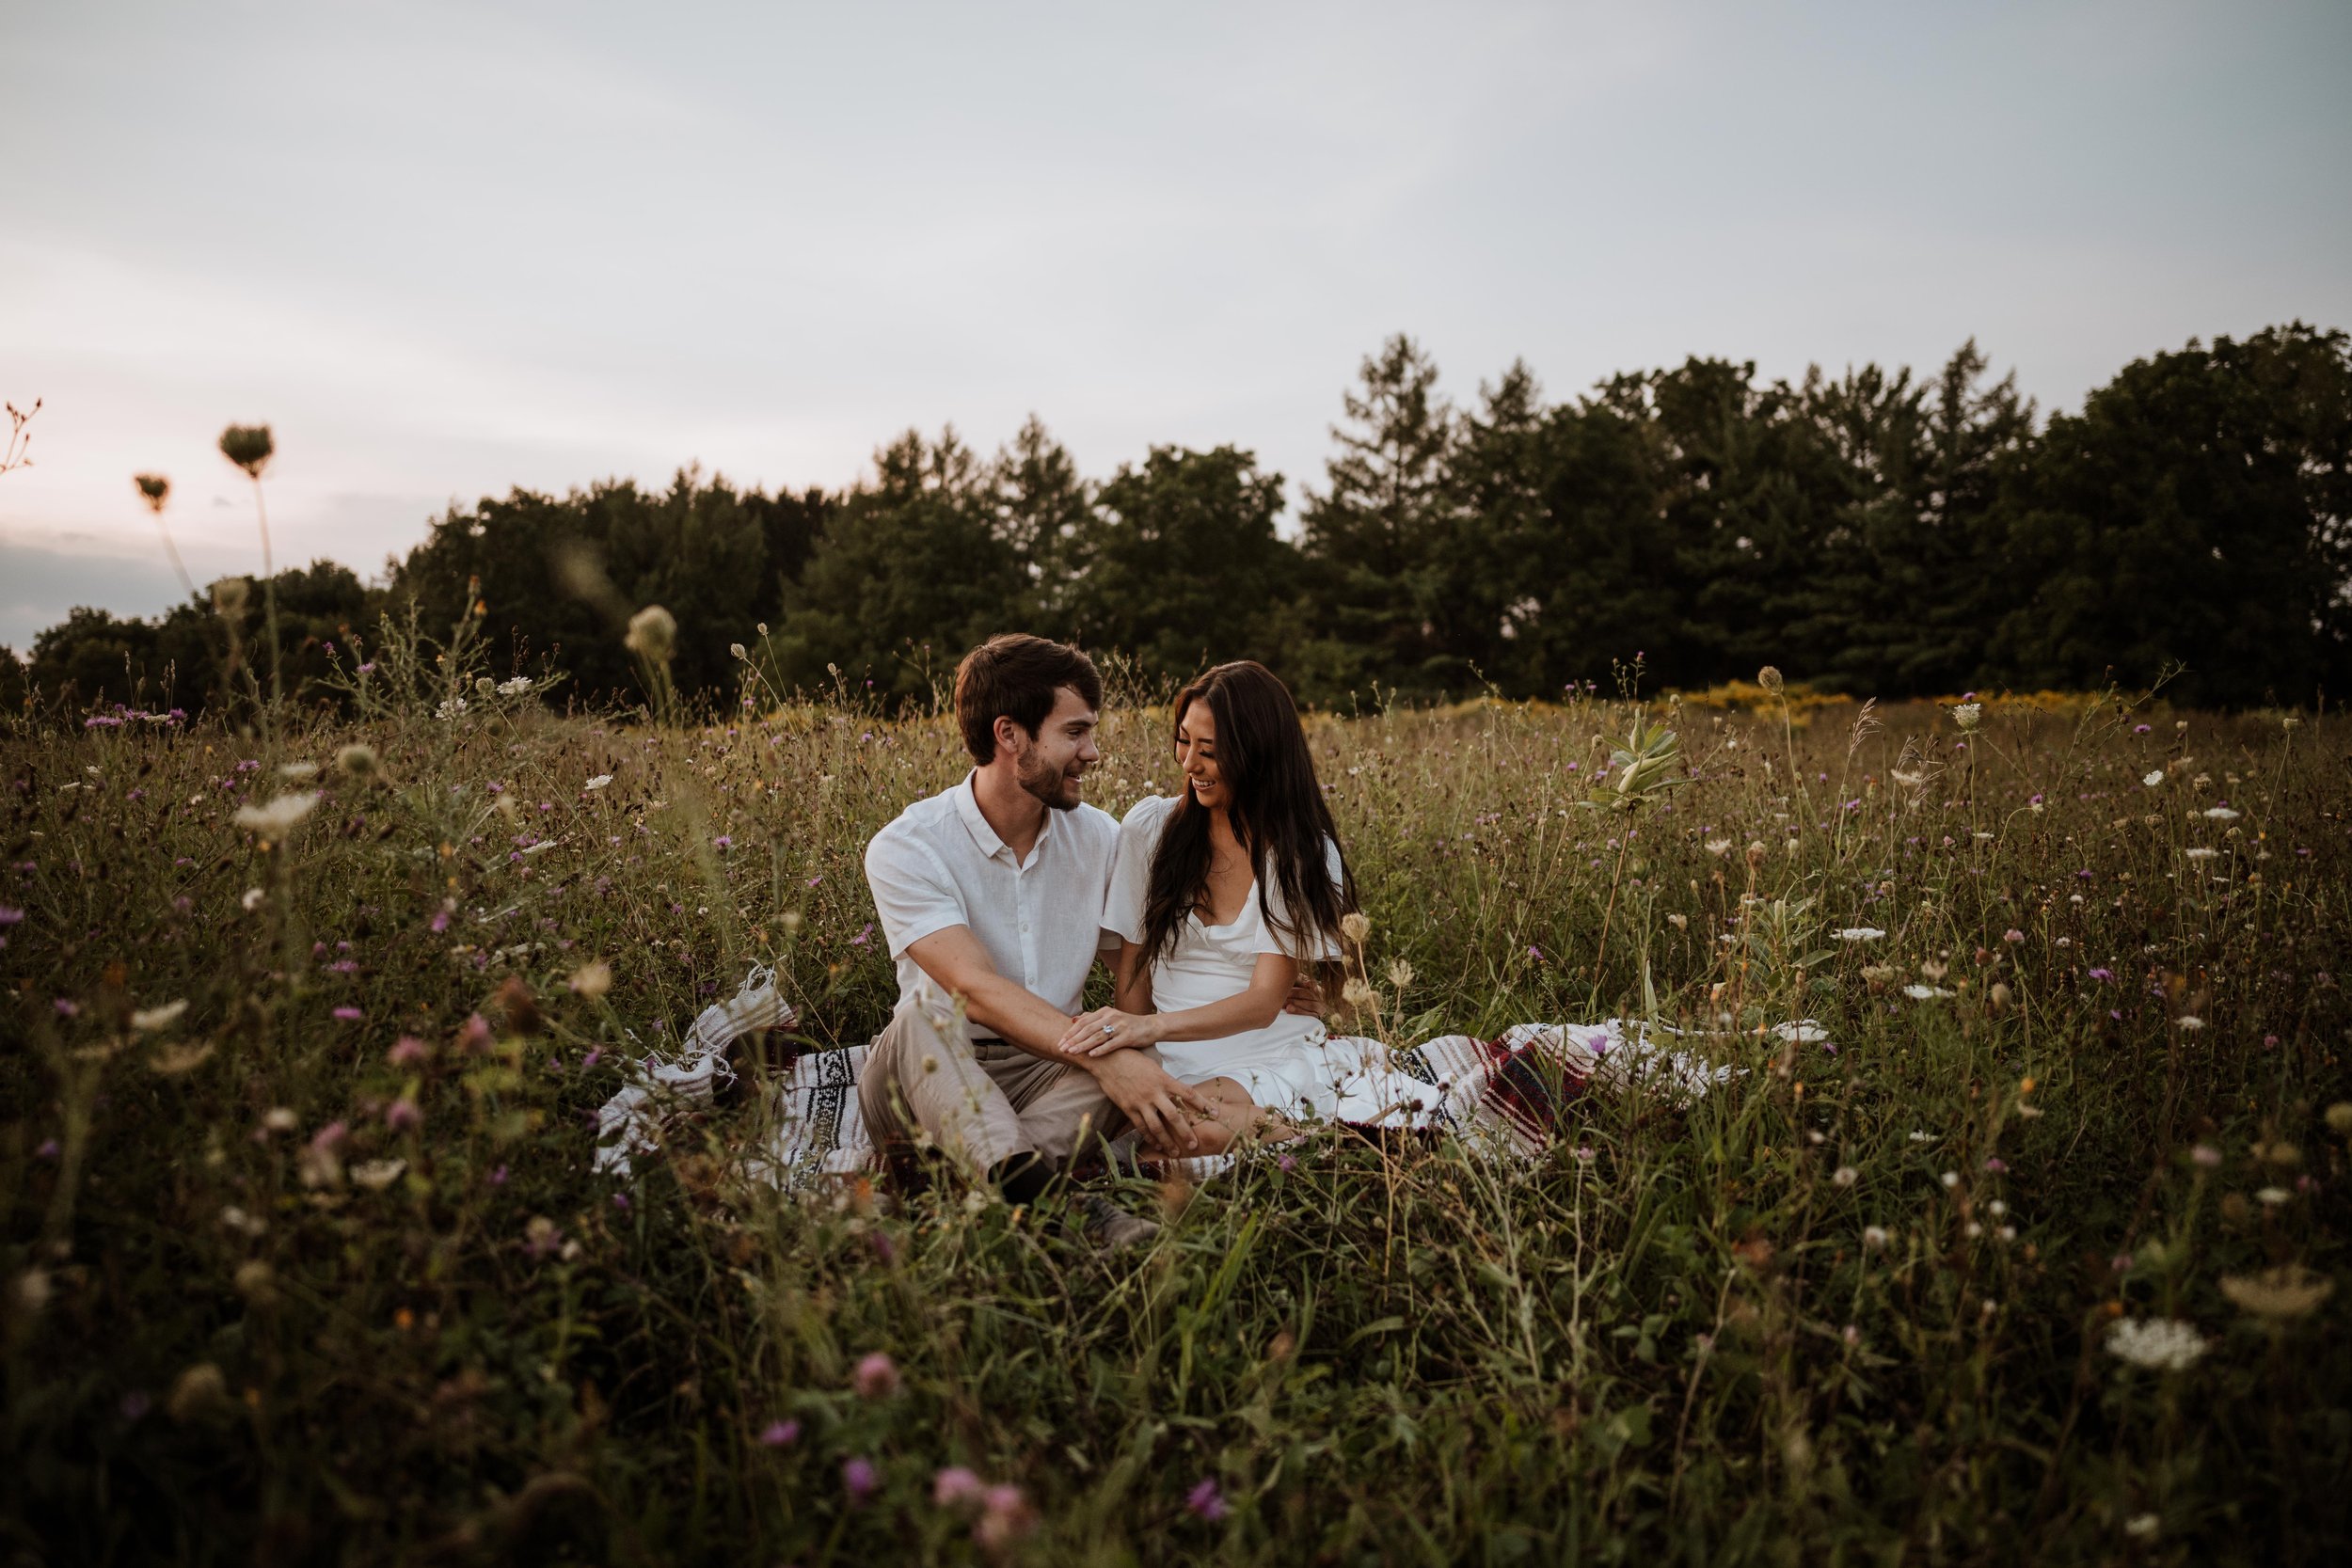 A couple enjoying the sunset together in a field of wildflowers.